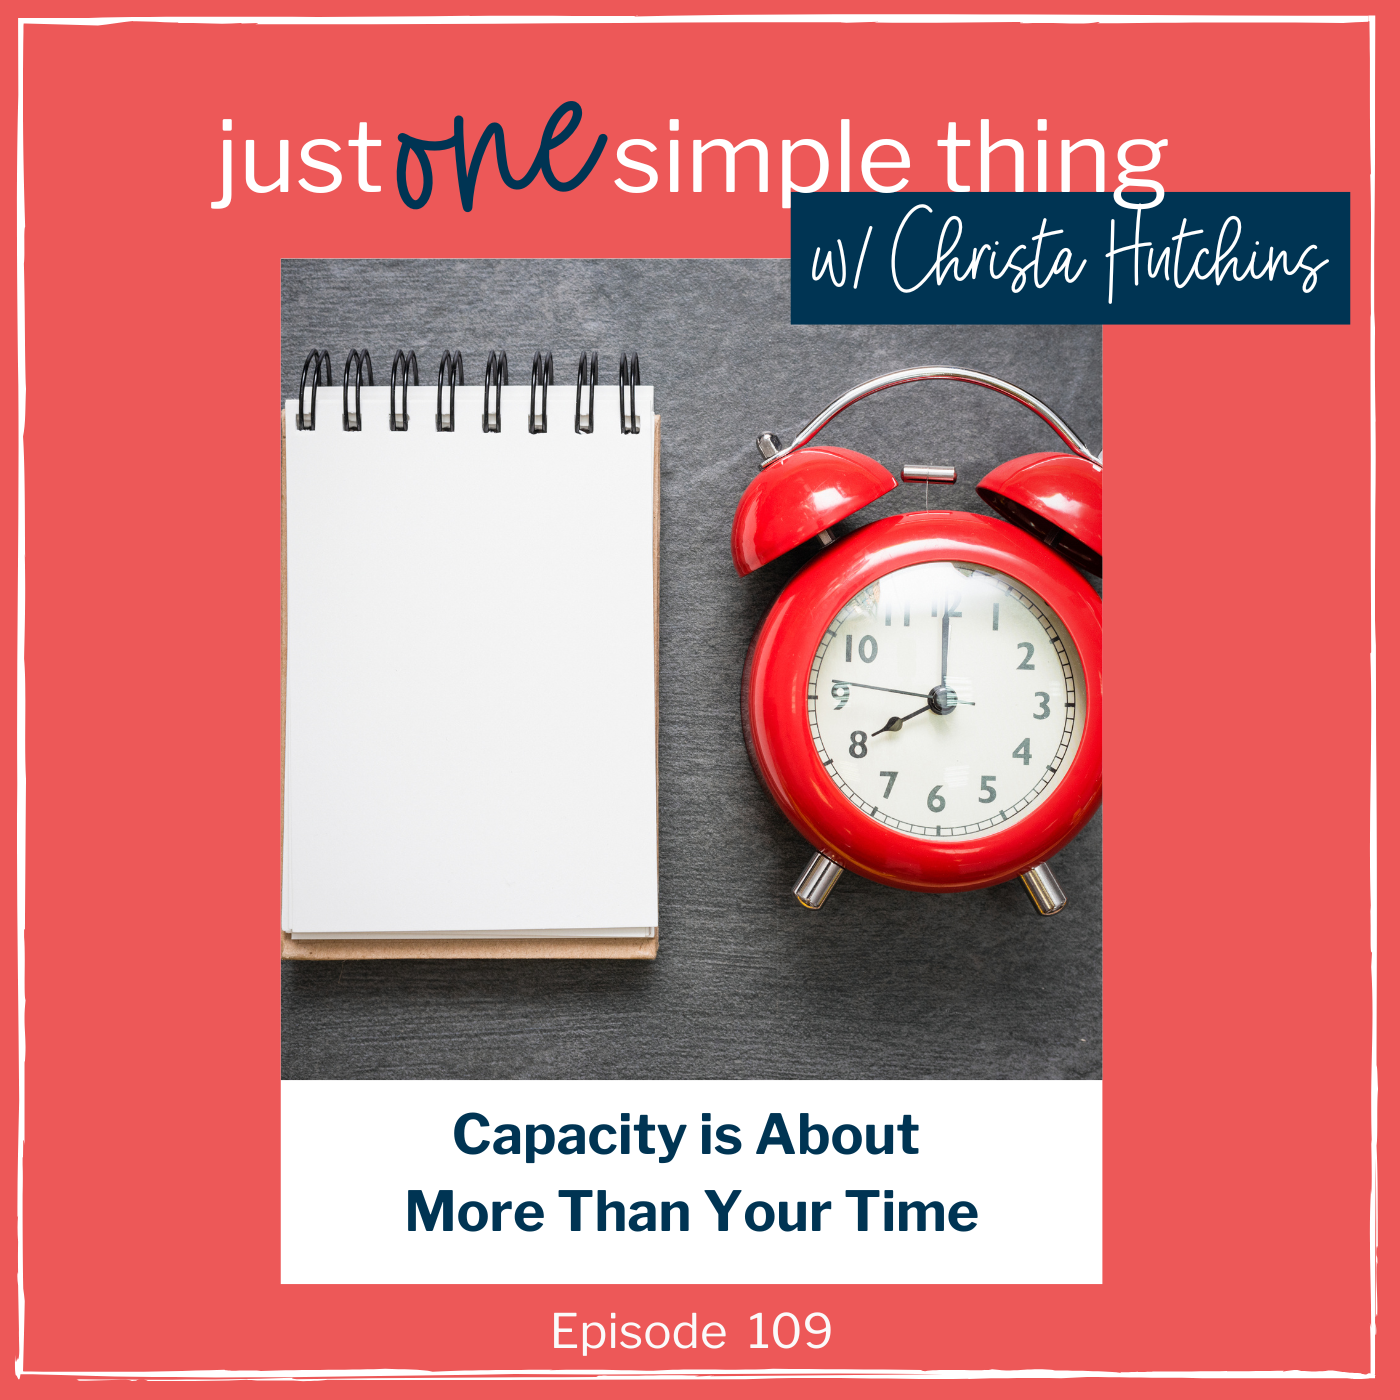 Your Capacity is About More Than Your Time